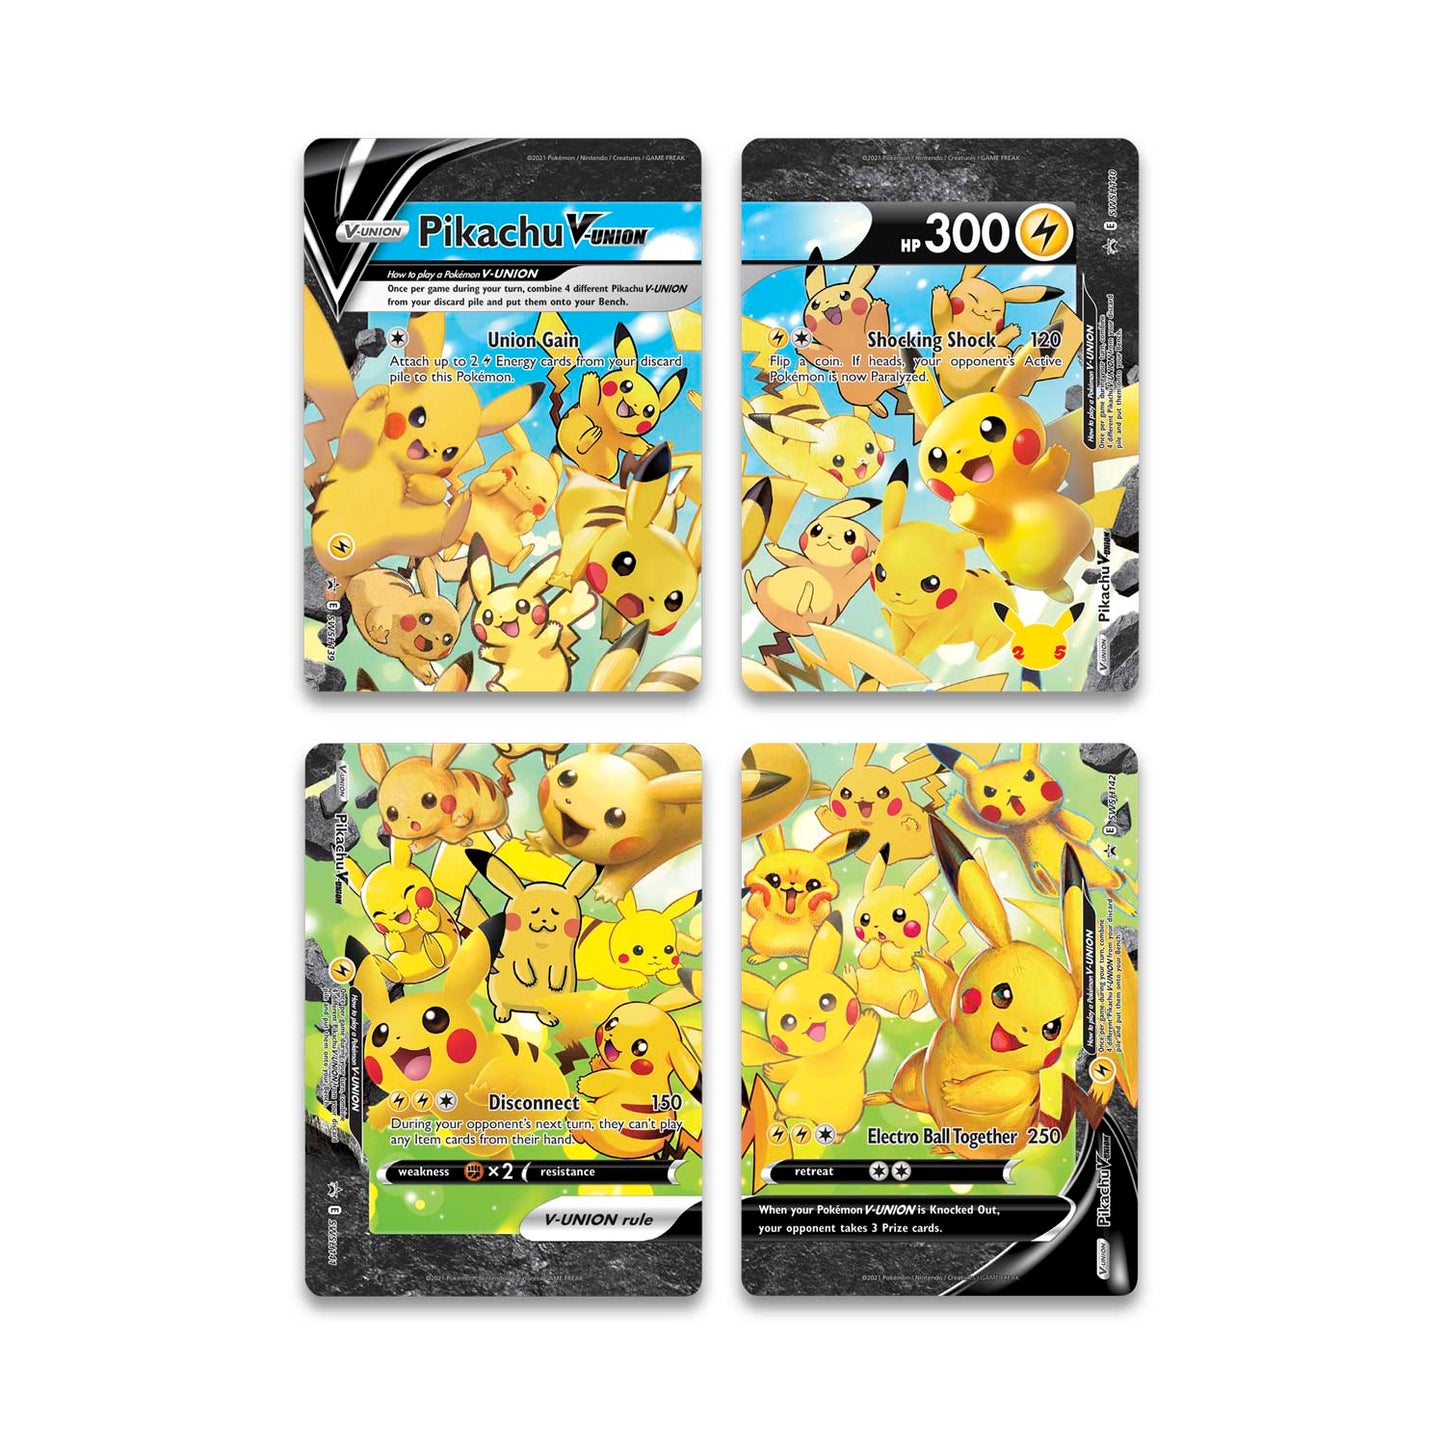 Pikachu V-union Special Collection